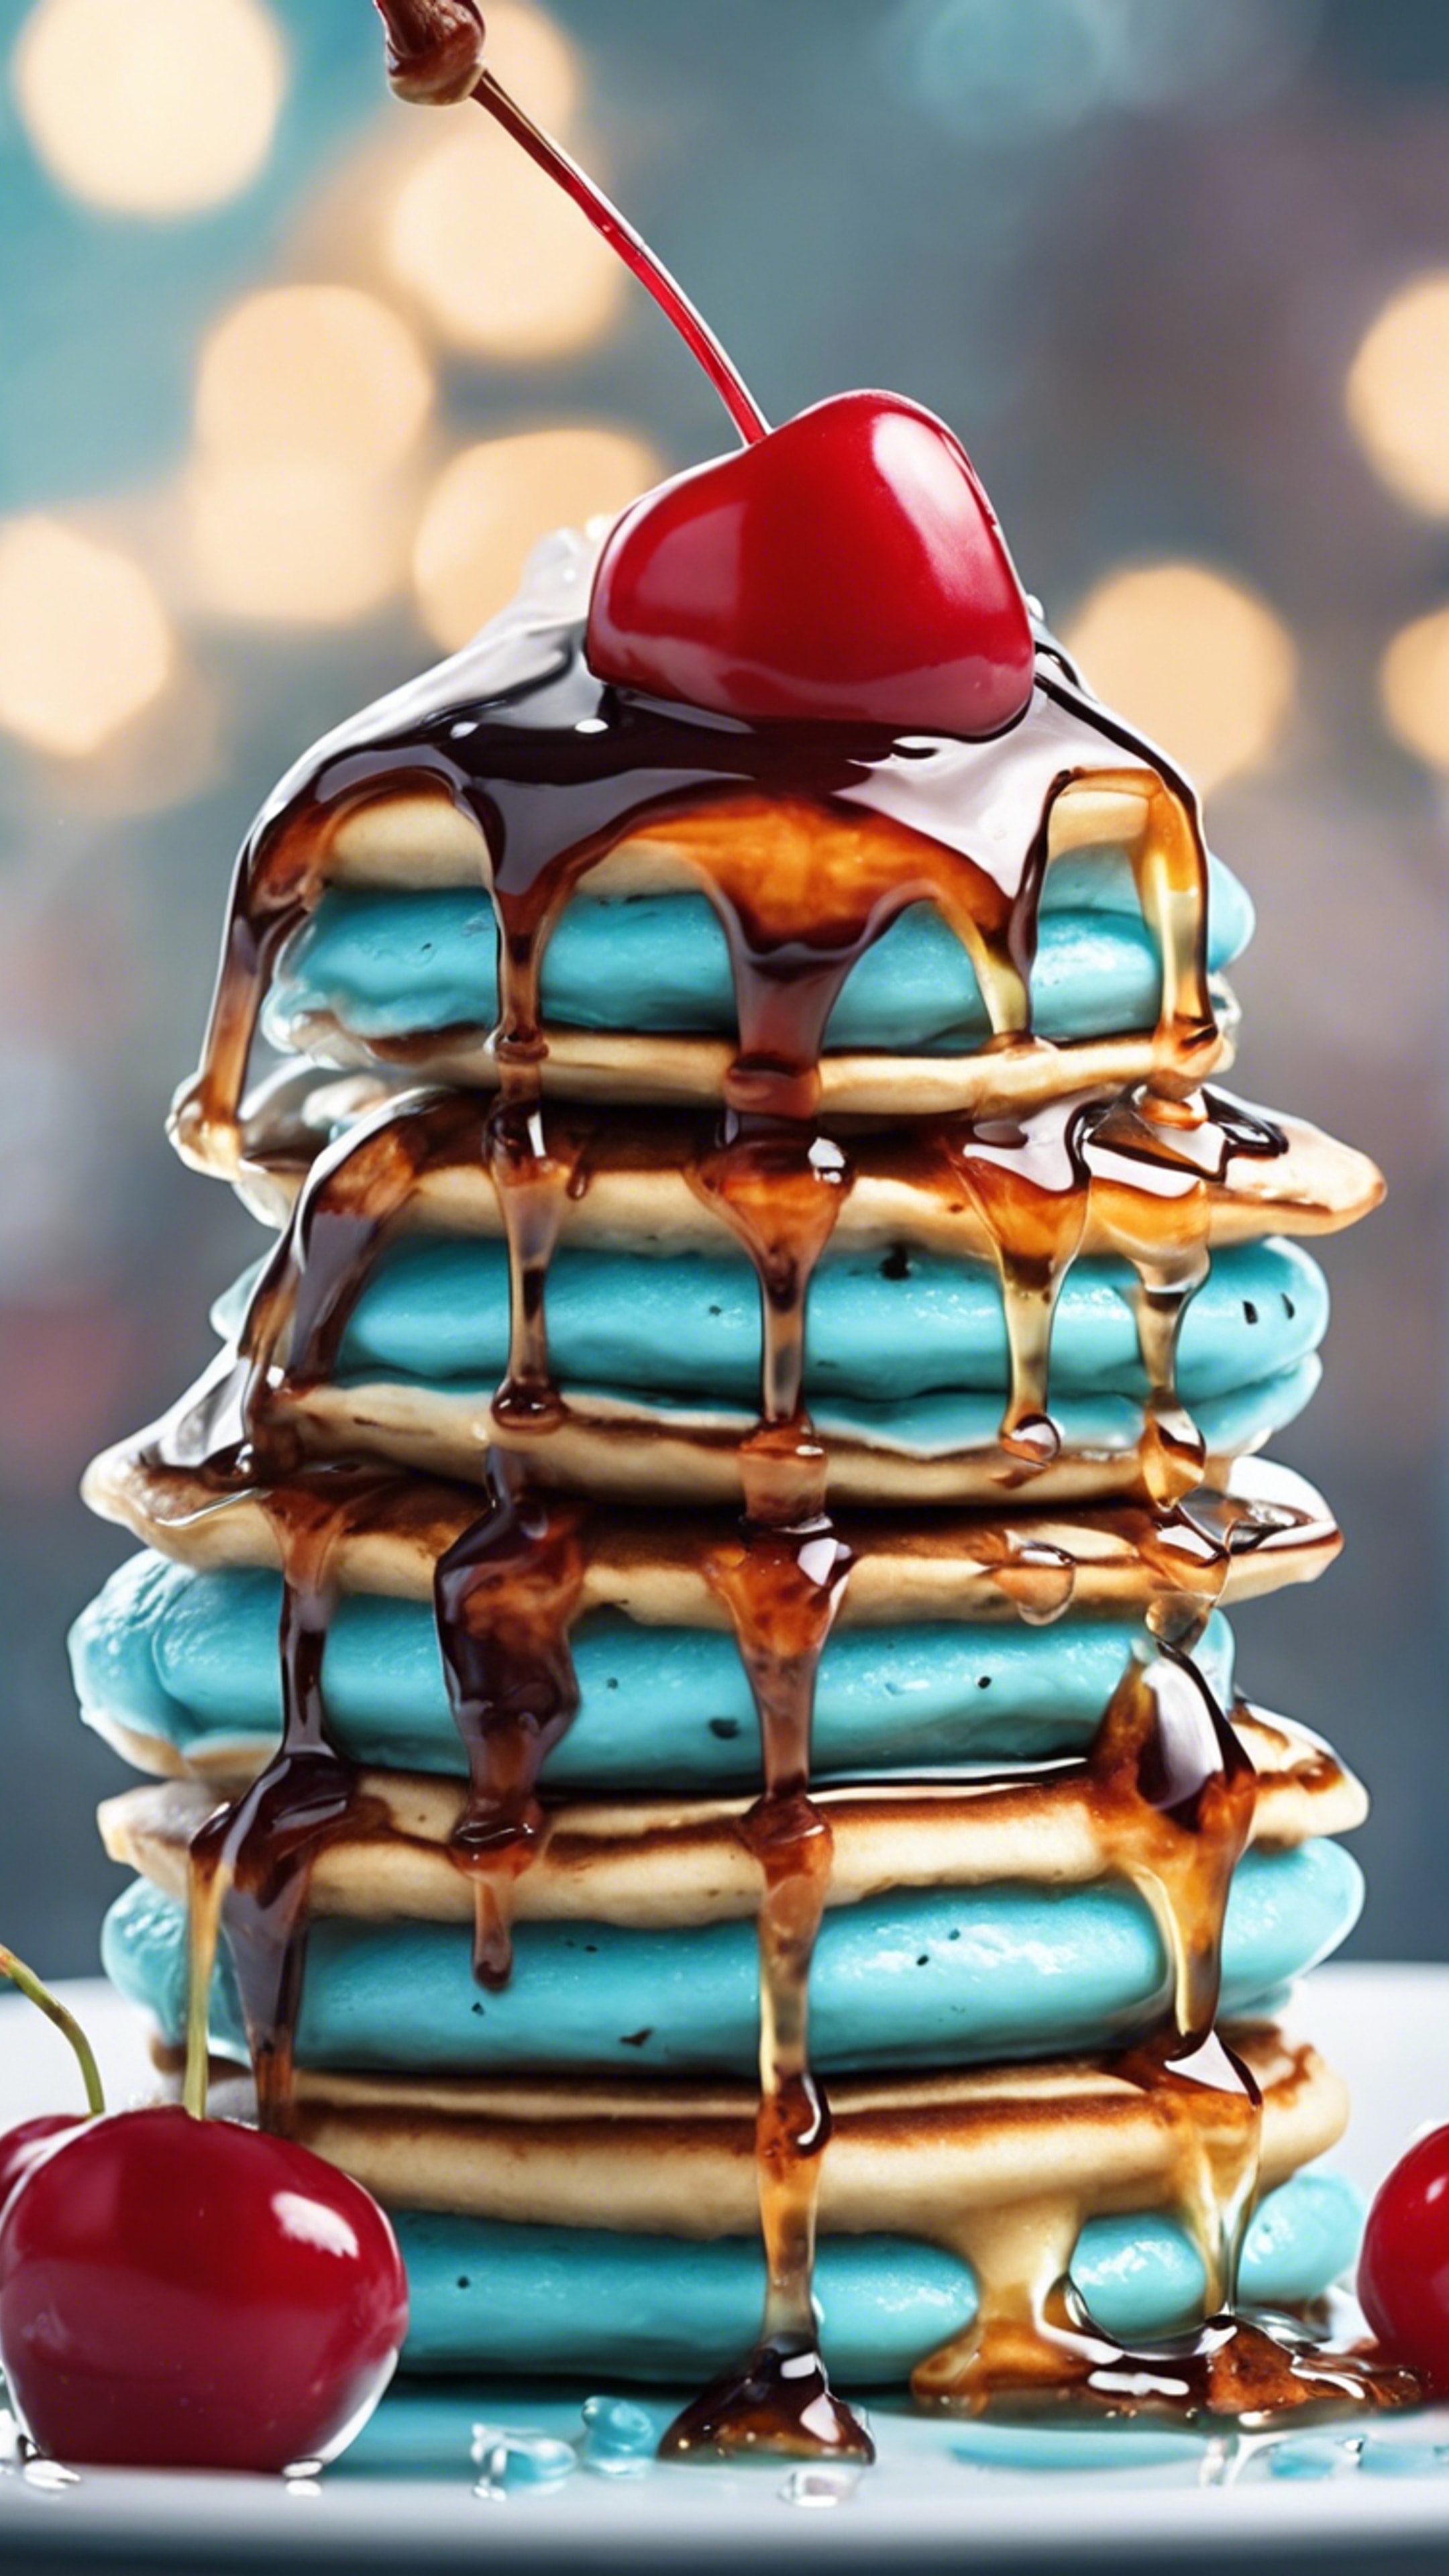 A stack of kawaii light blue pancakes dripping with syrup and a cherry on top. Ταπετσαρία[05c3a9af3a95463c8379]